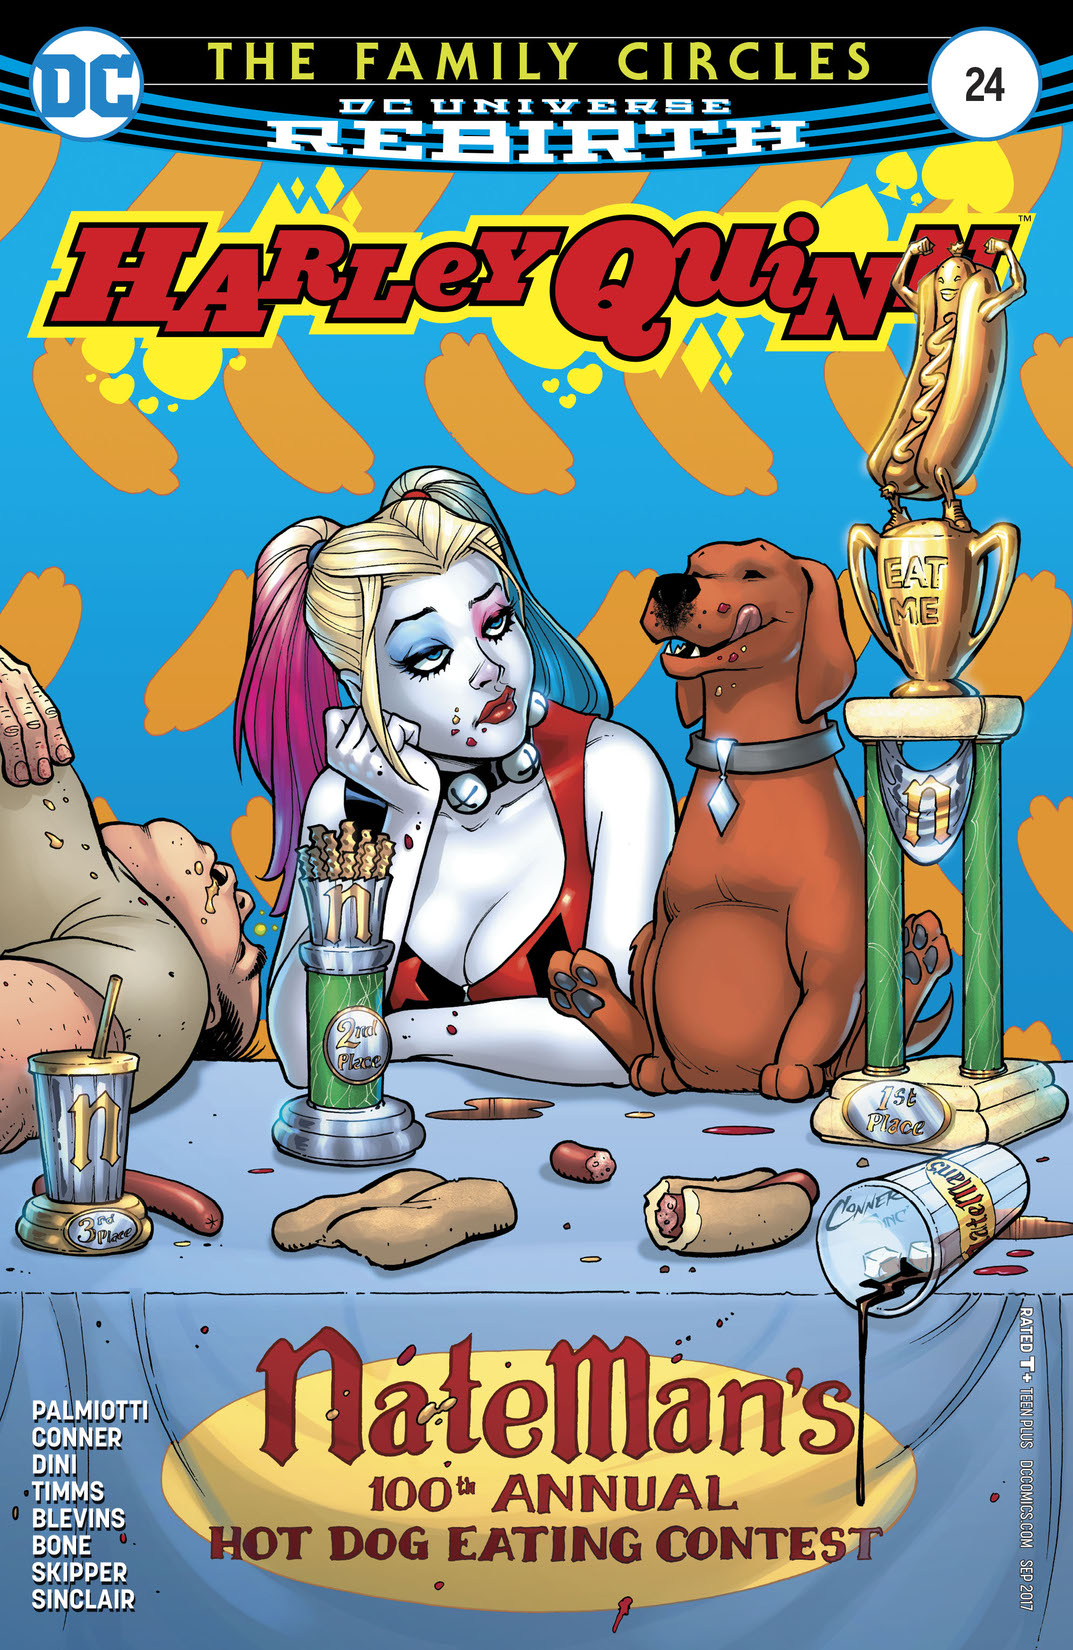 Harley Quinn (2016-) #24 preview images